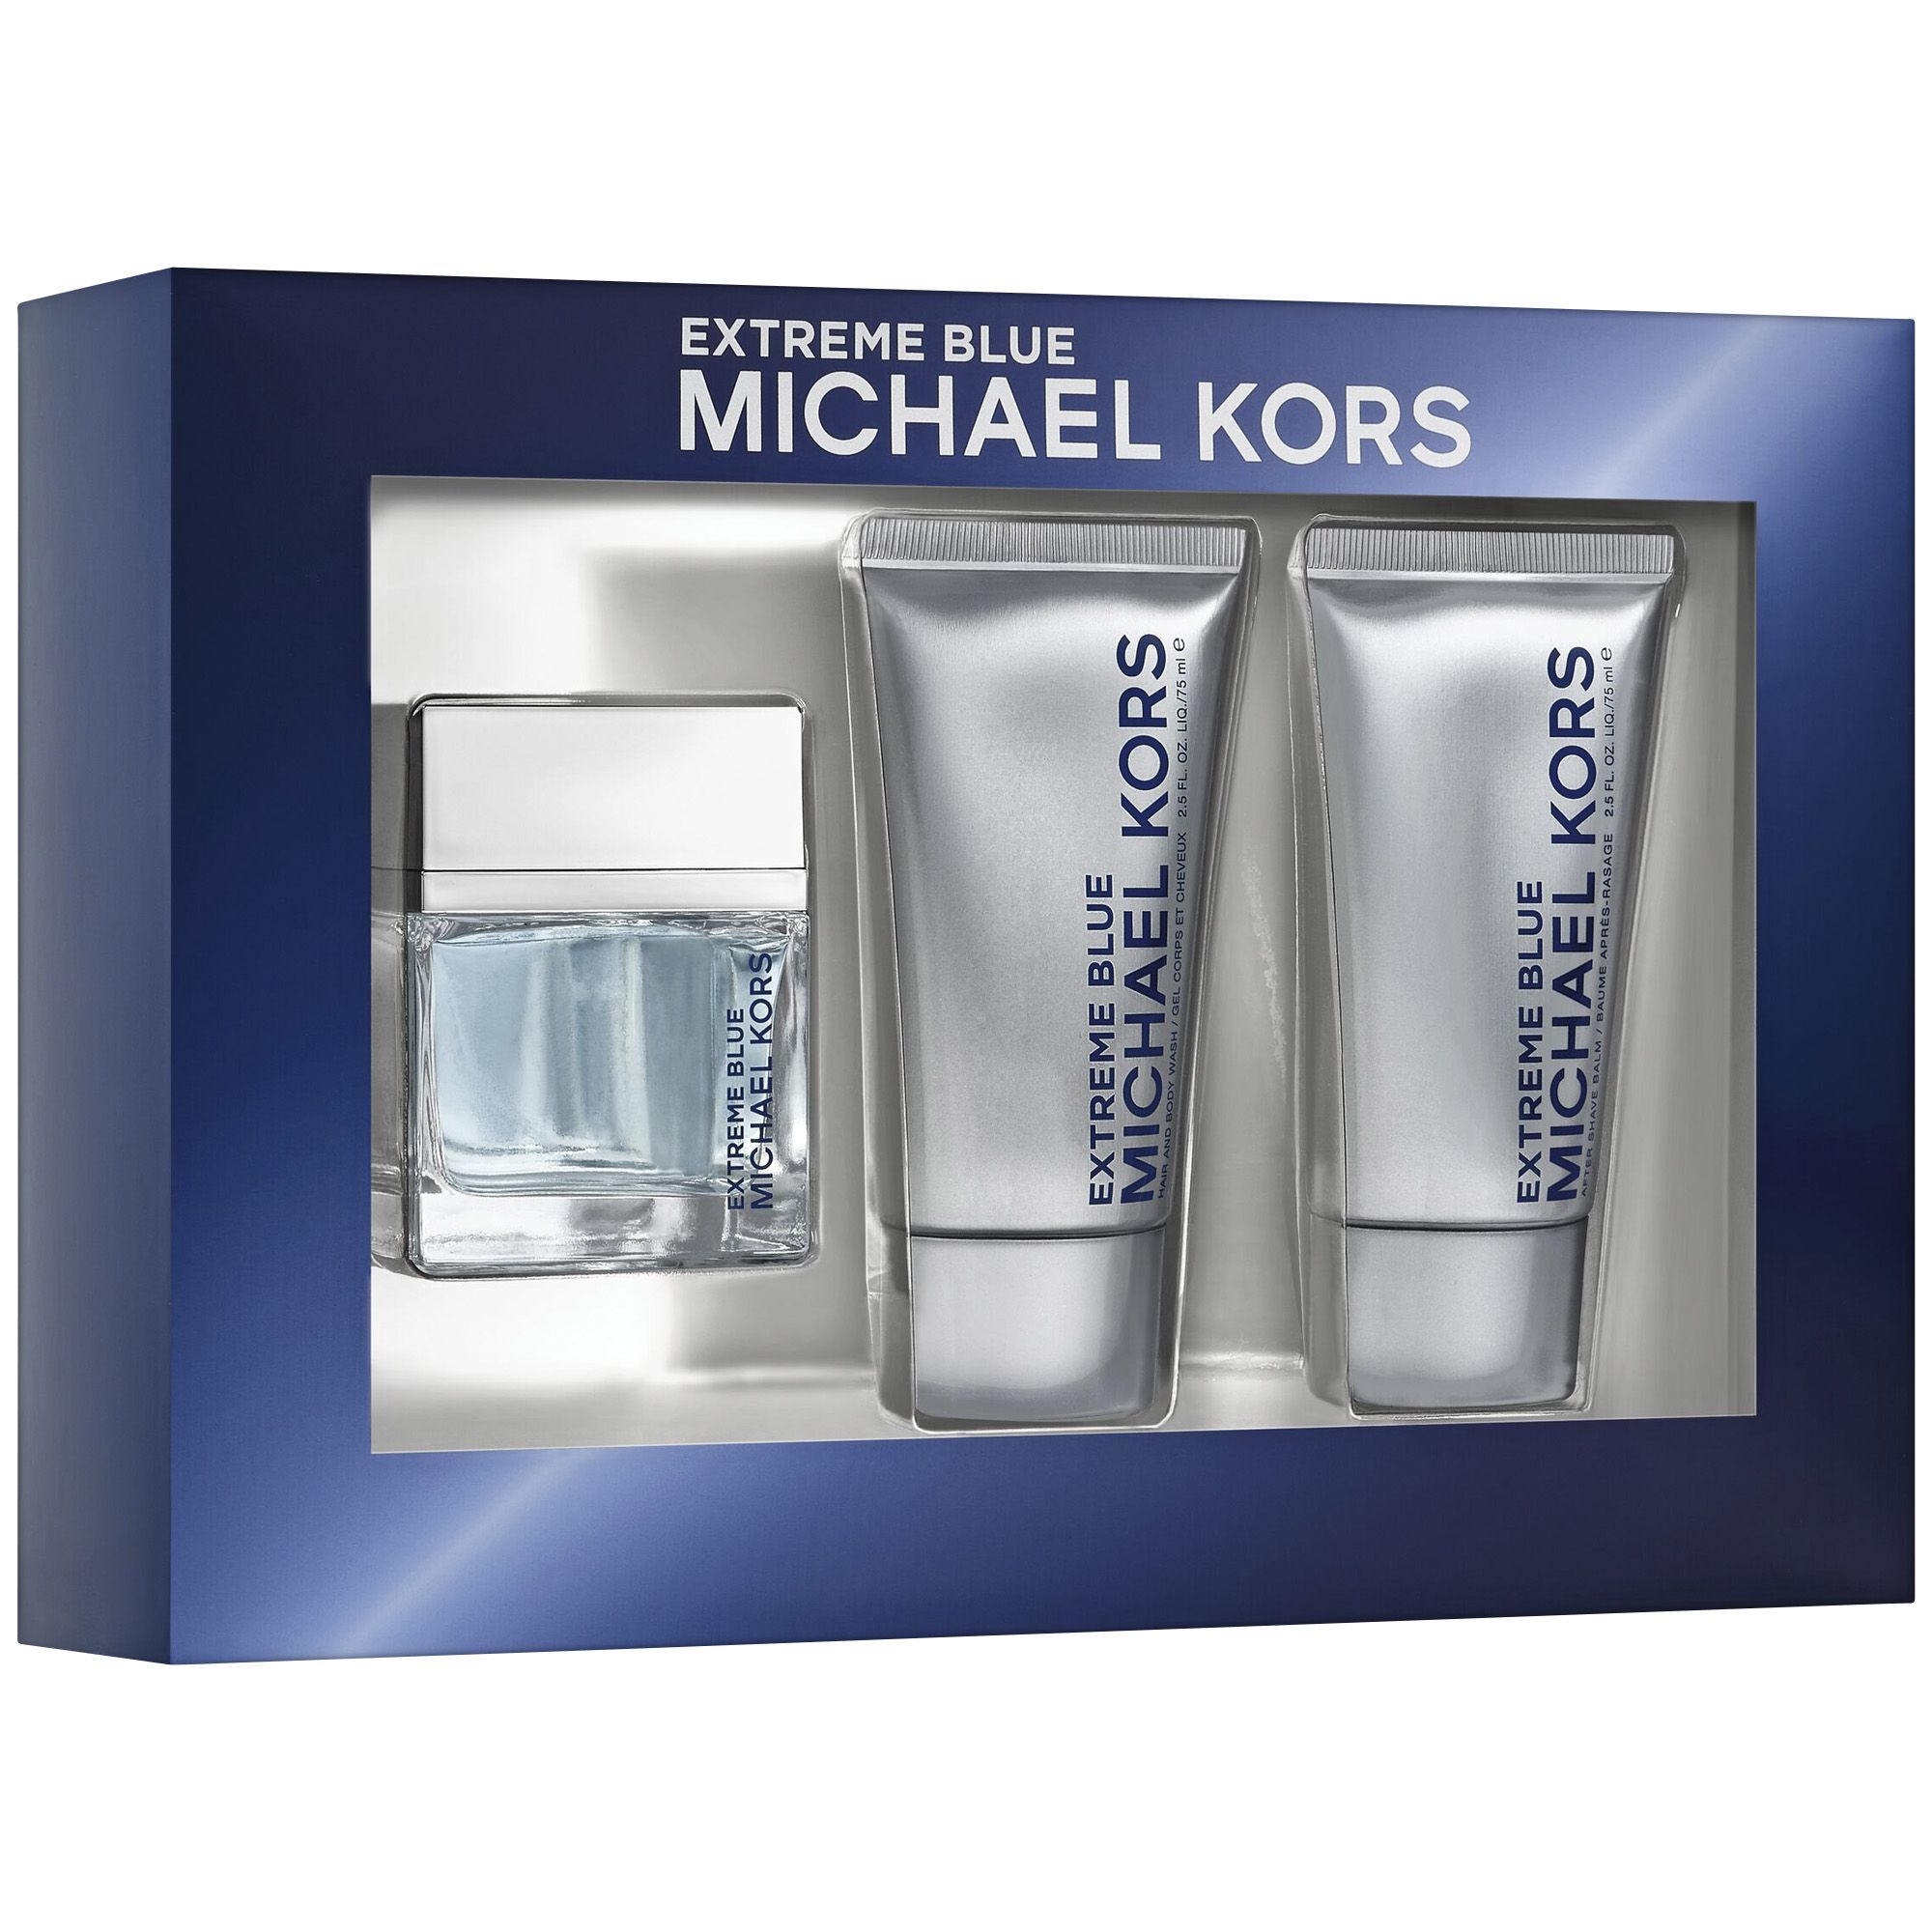 Michael Kors Extreme Blue -120ml edt - Perfume, Cologne & Discount Cosmetics